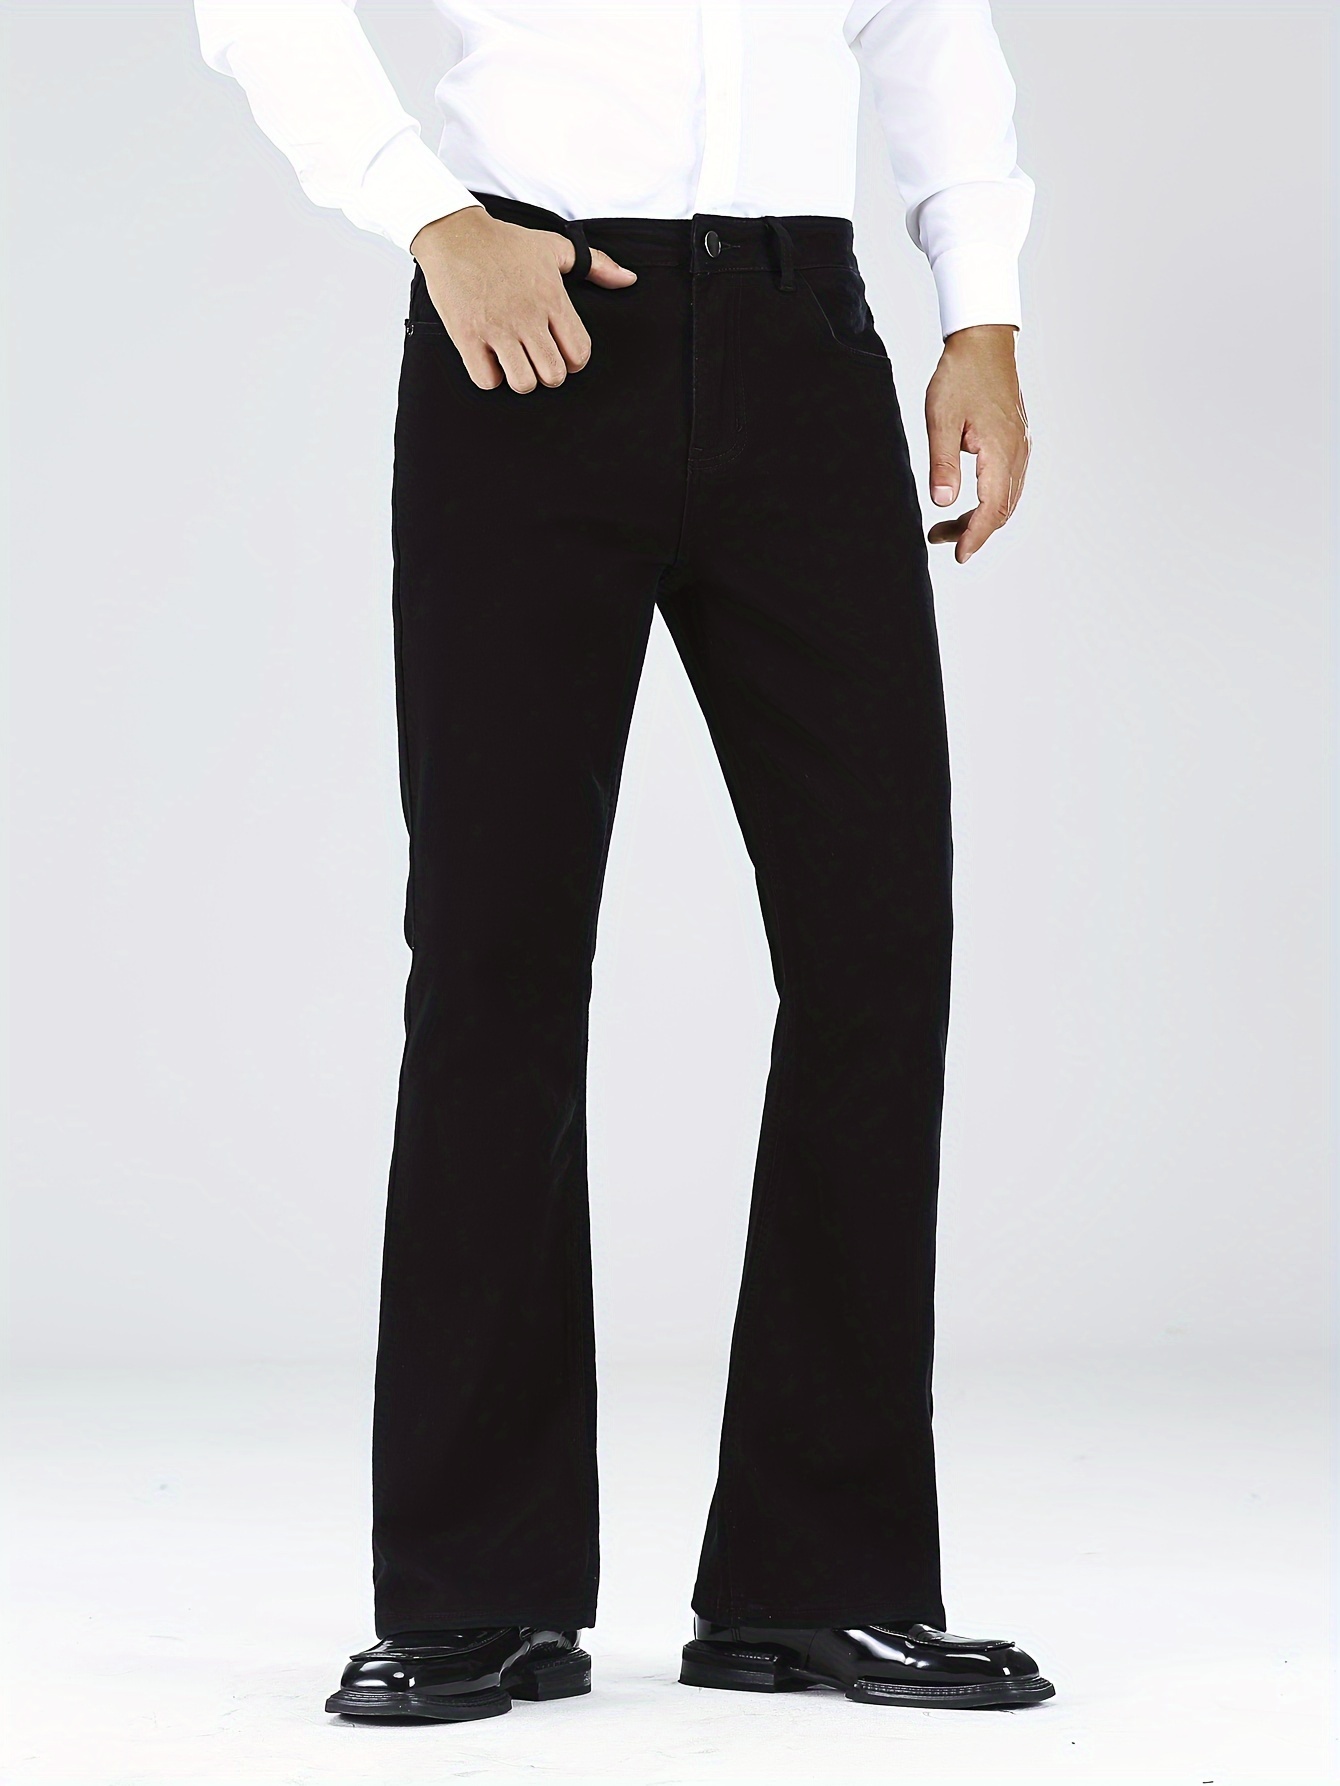 Men Formal Flared Bell Bottom Dress Pants Stretch Smart Casual Trousers  Bootcut